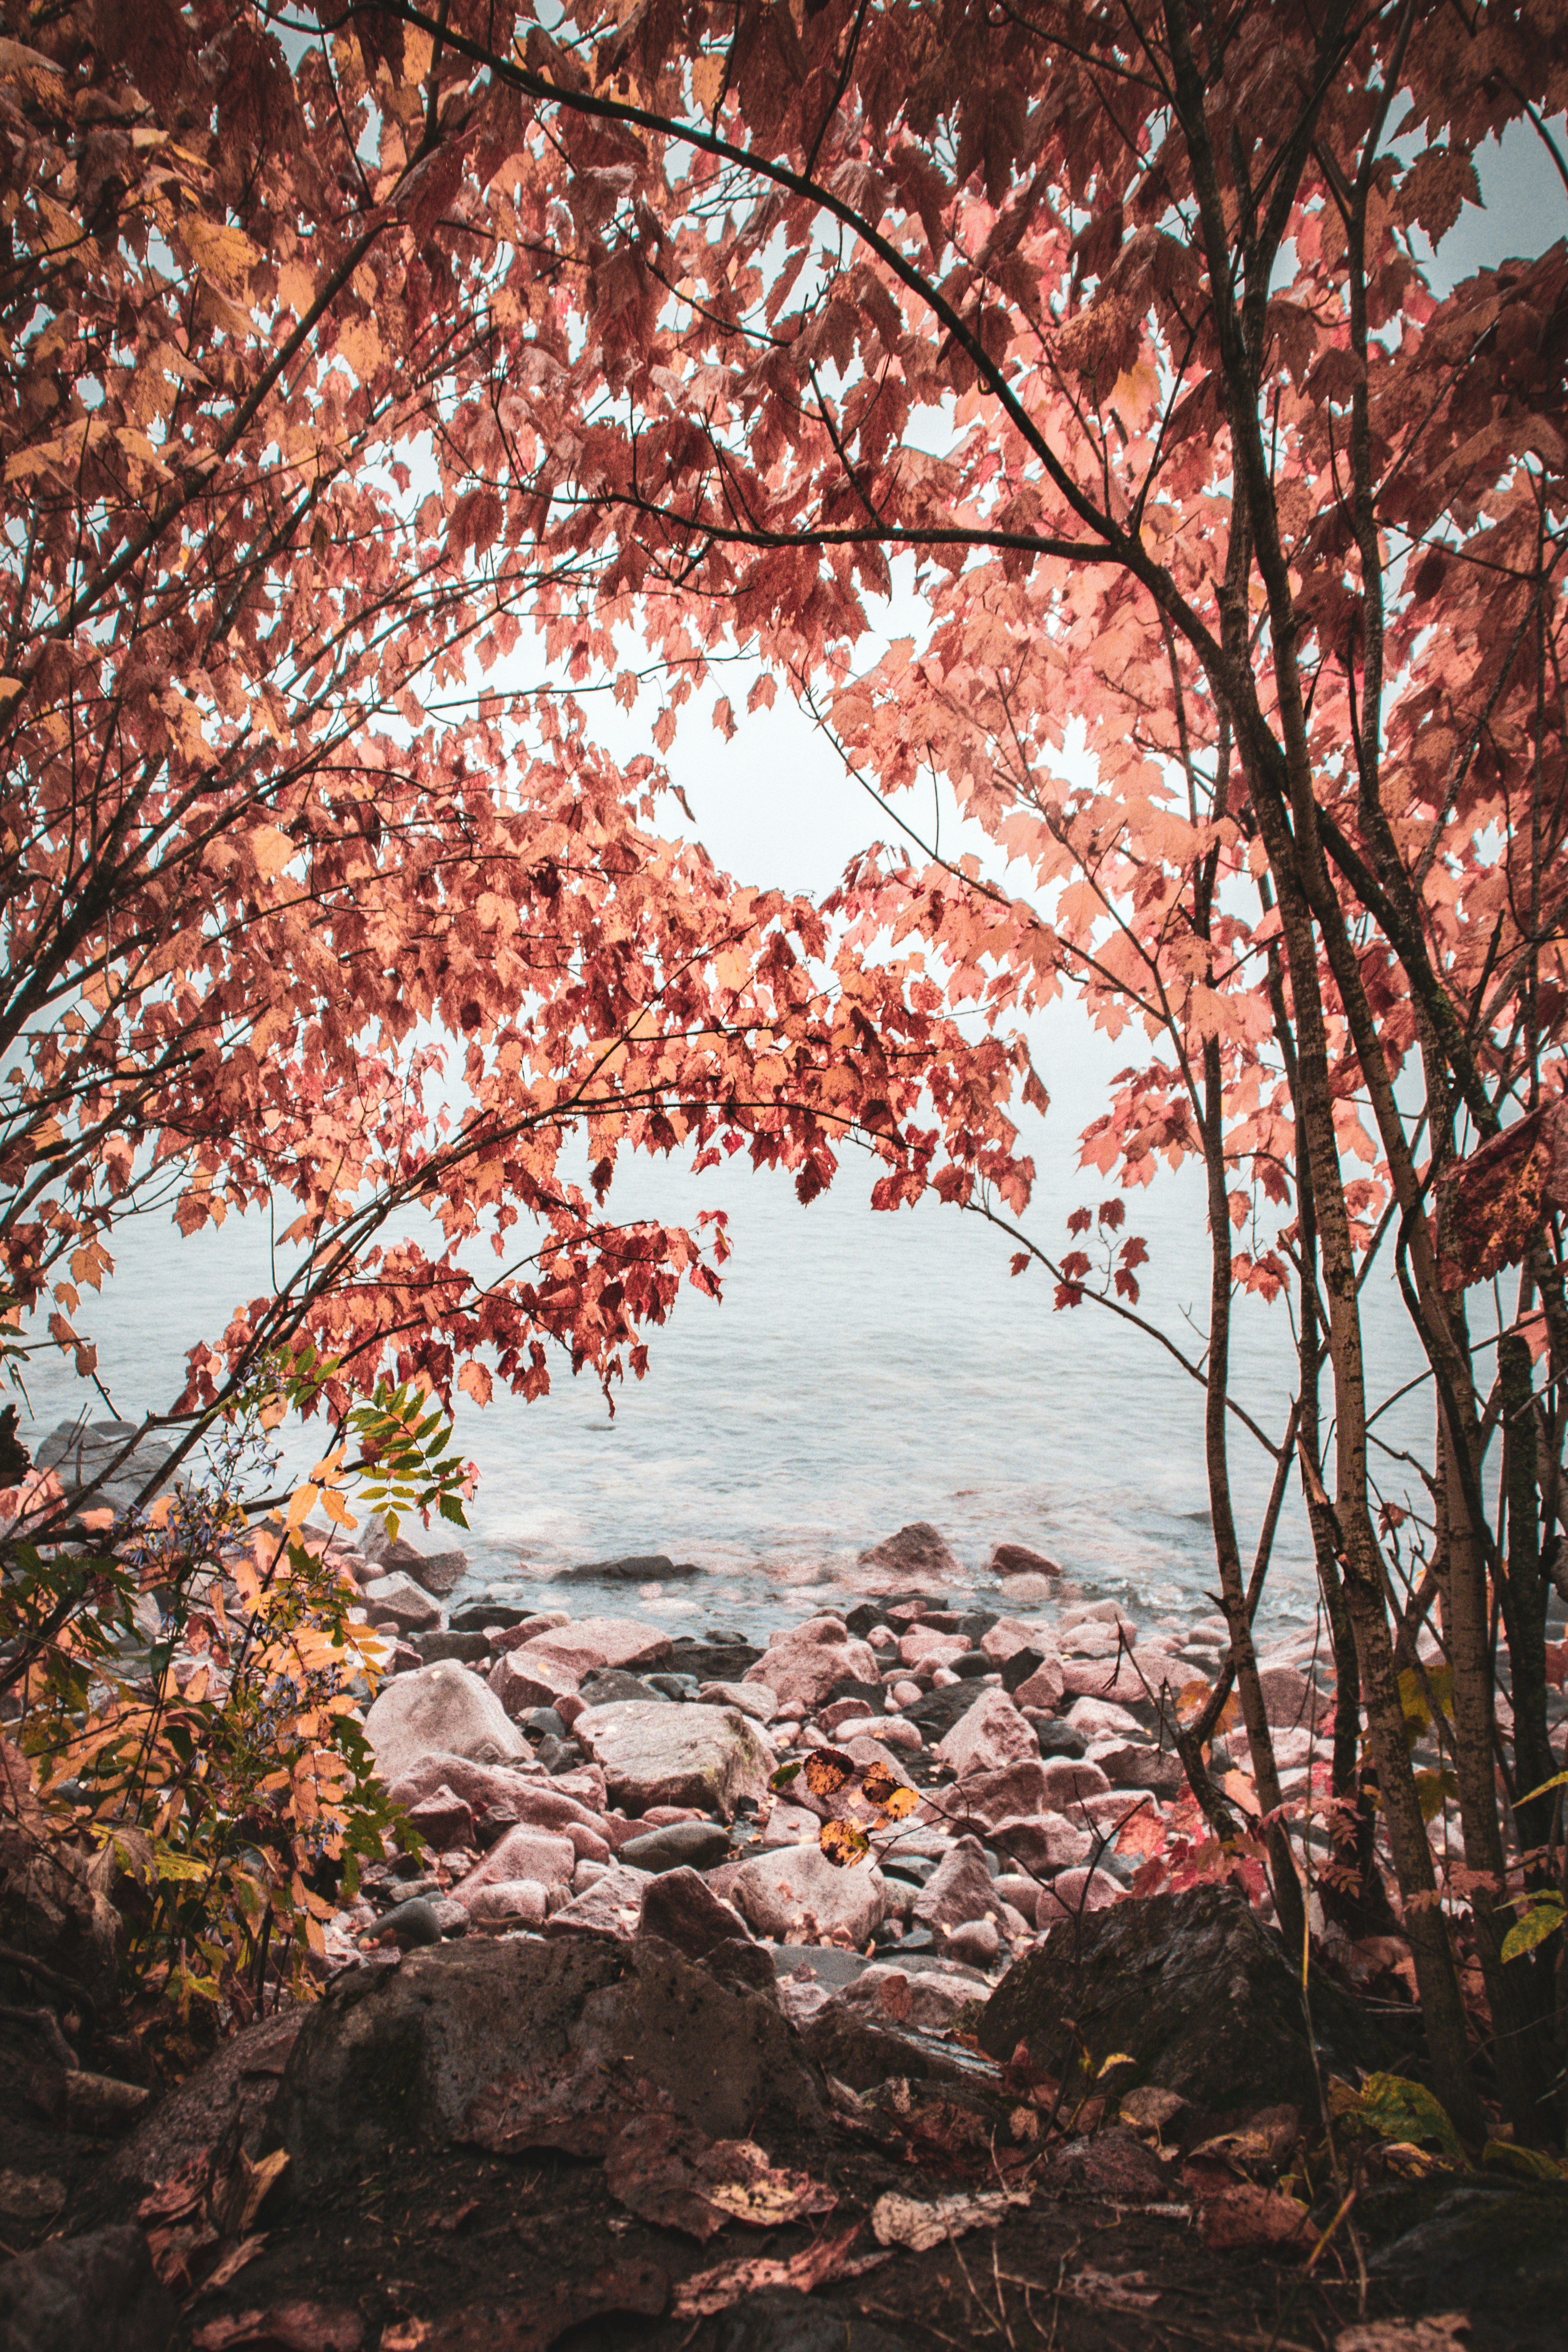 Entrance to a beach on lake superior on the north shore of minnesota with fall colors
go to linktr.ee/anthonylonder to see more of my work